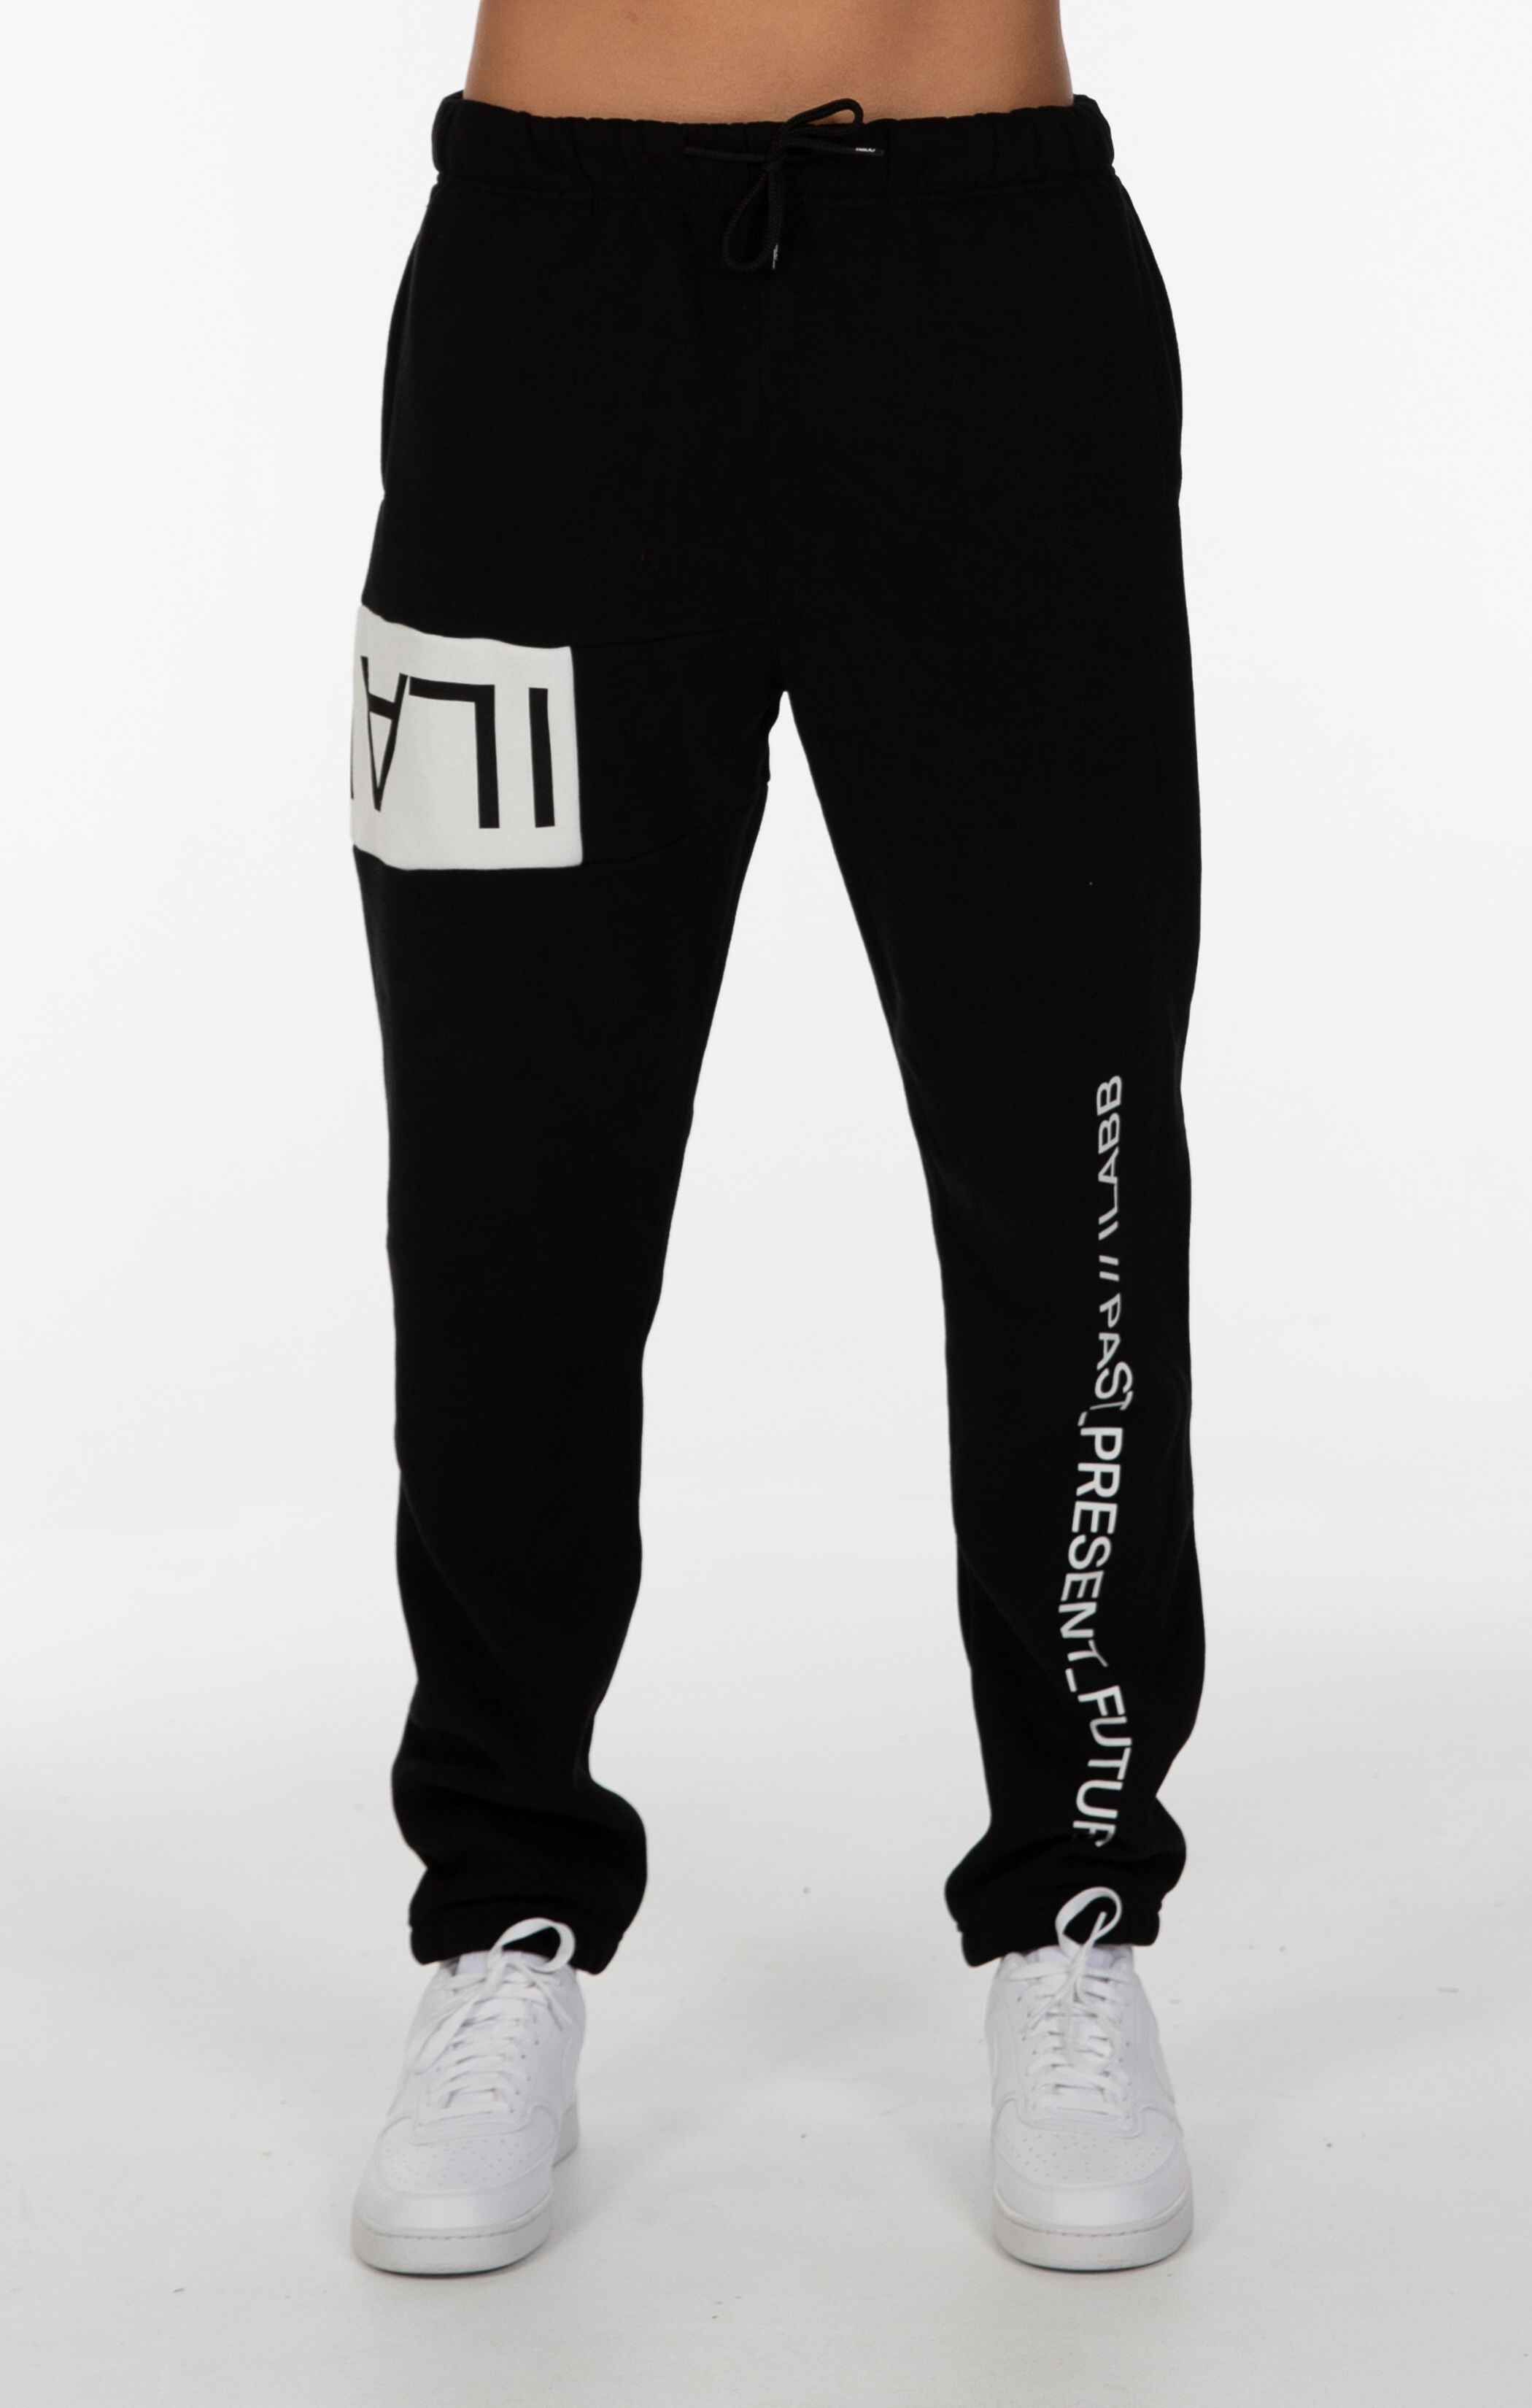 ILABB MENS PANEL TRACKIE PANT - BLACK - Mens-Bottoms : Sequence Surf ...